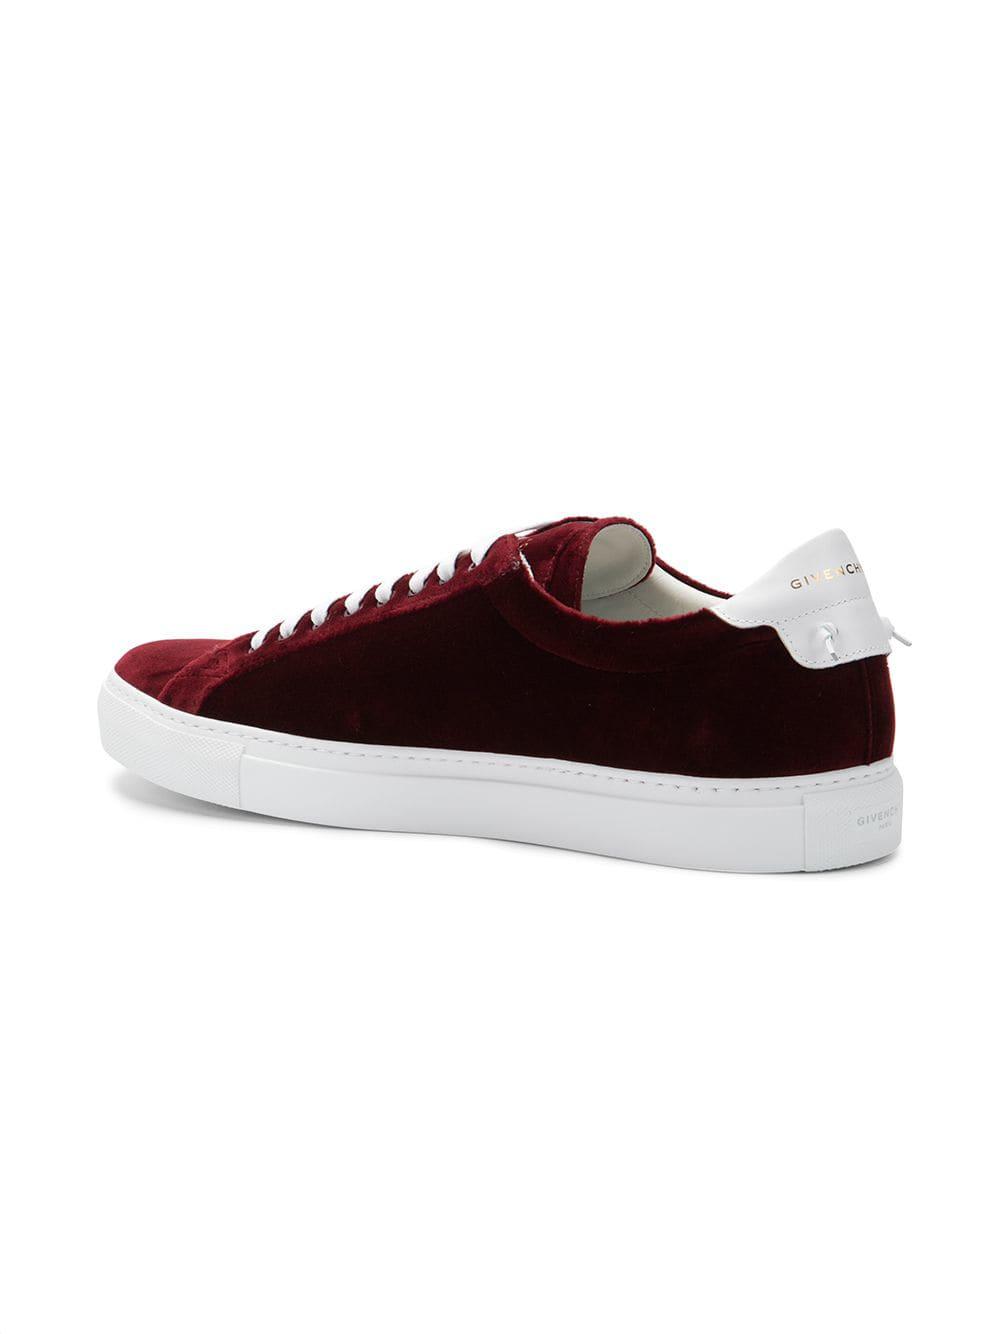 Givenchy Urban Street Velvet Low-top Sneakers in Burgundy (Red) for Men -  Lyst